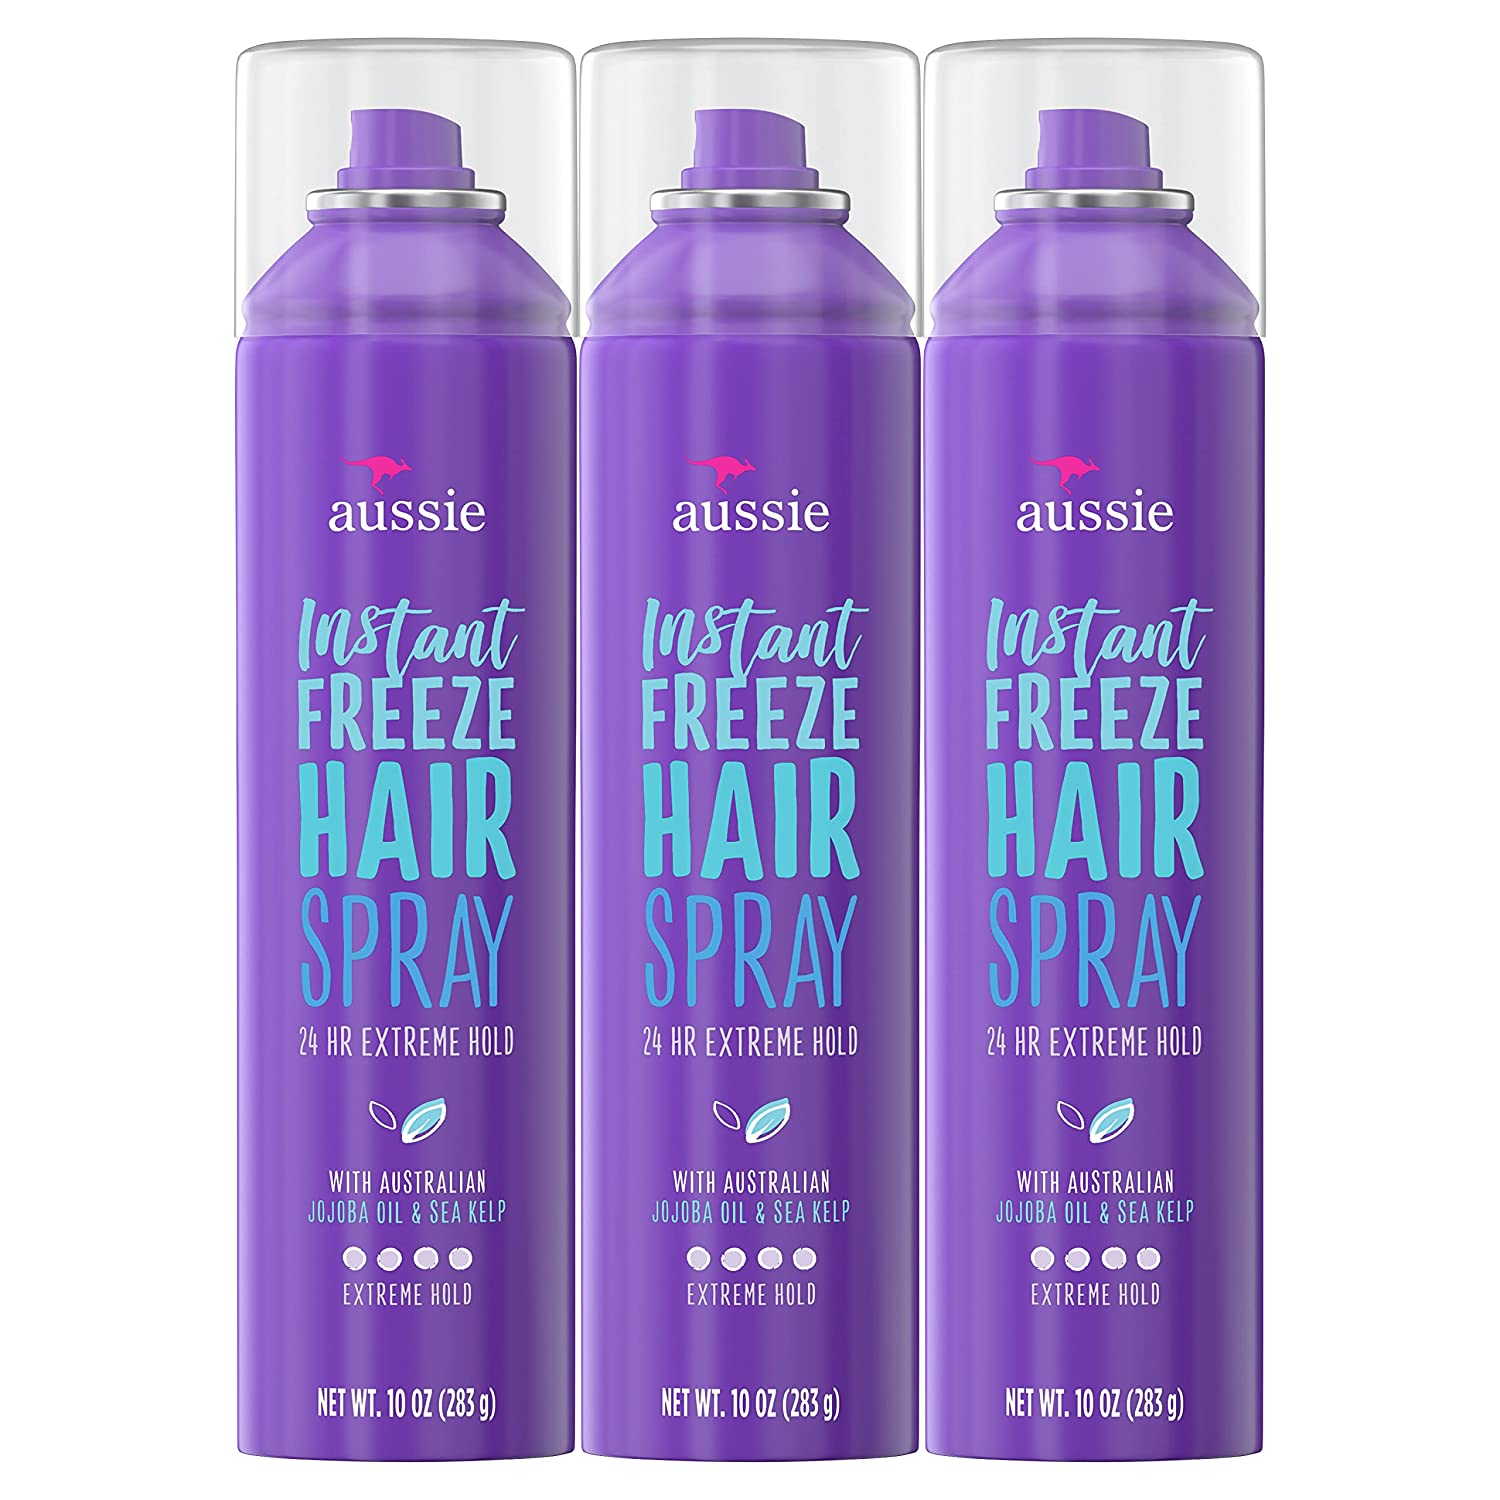 Aussie Extreme Hold Long-Lasting Hairspray For Women, 3-Pack